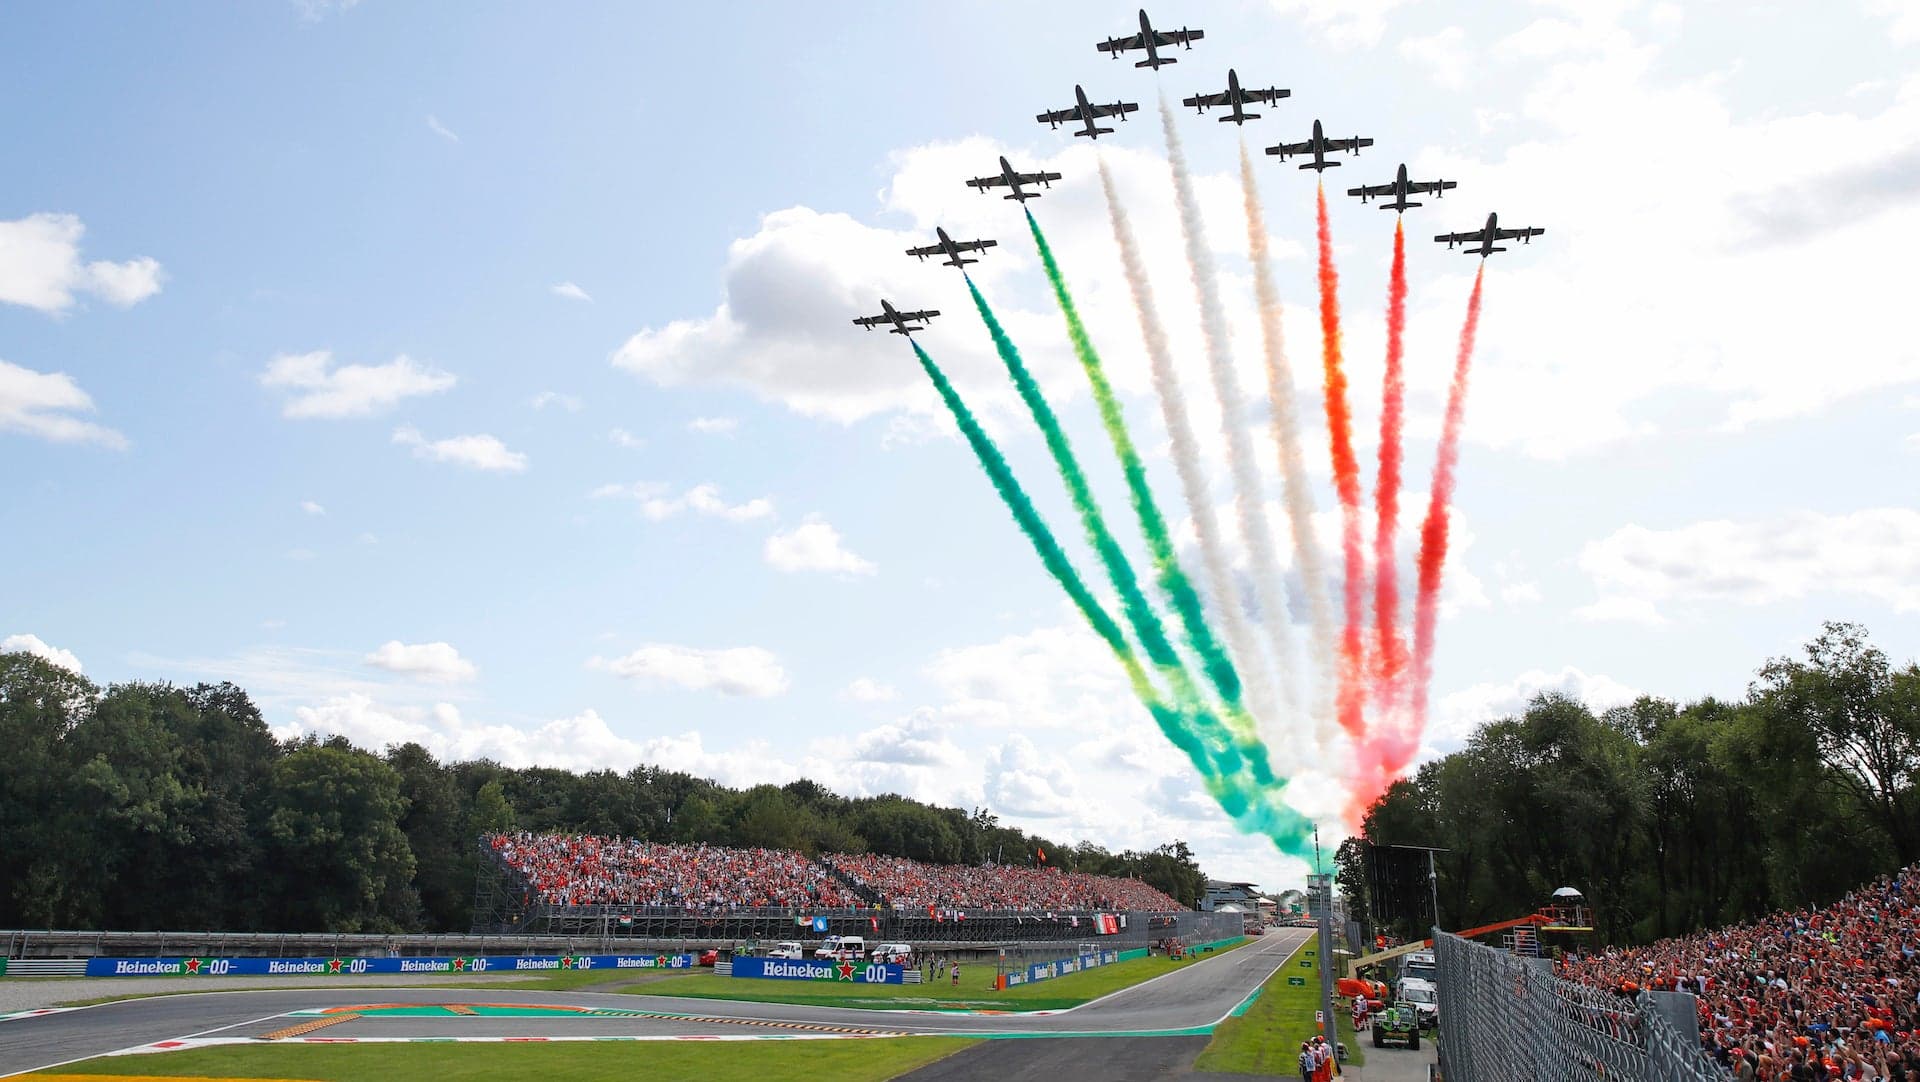 Formula 1 2020 Season Could Start in Europe Without Spectators This July